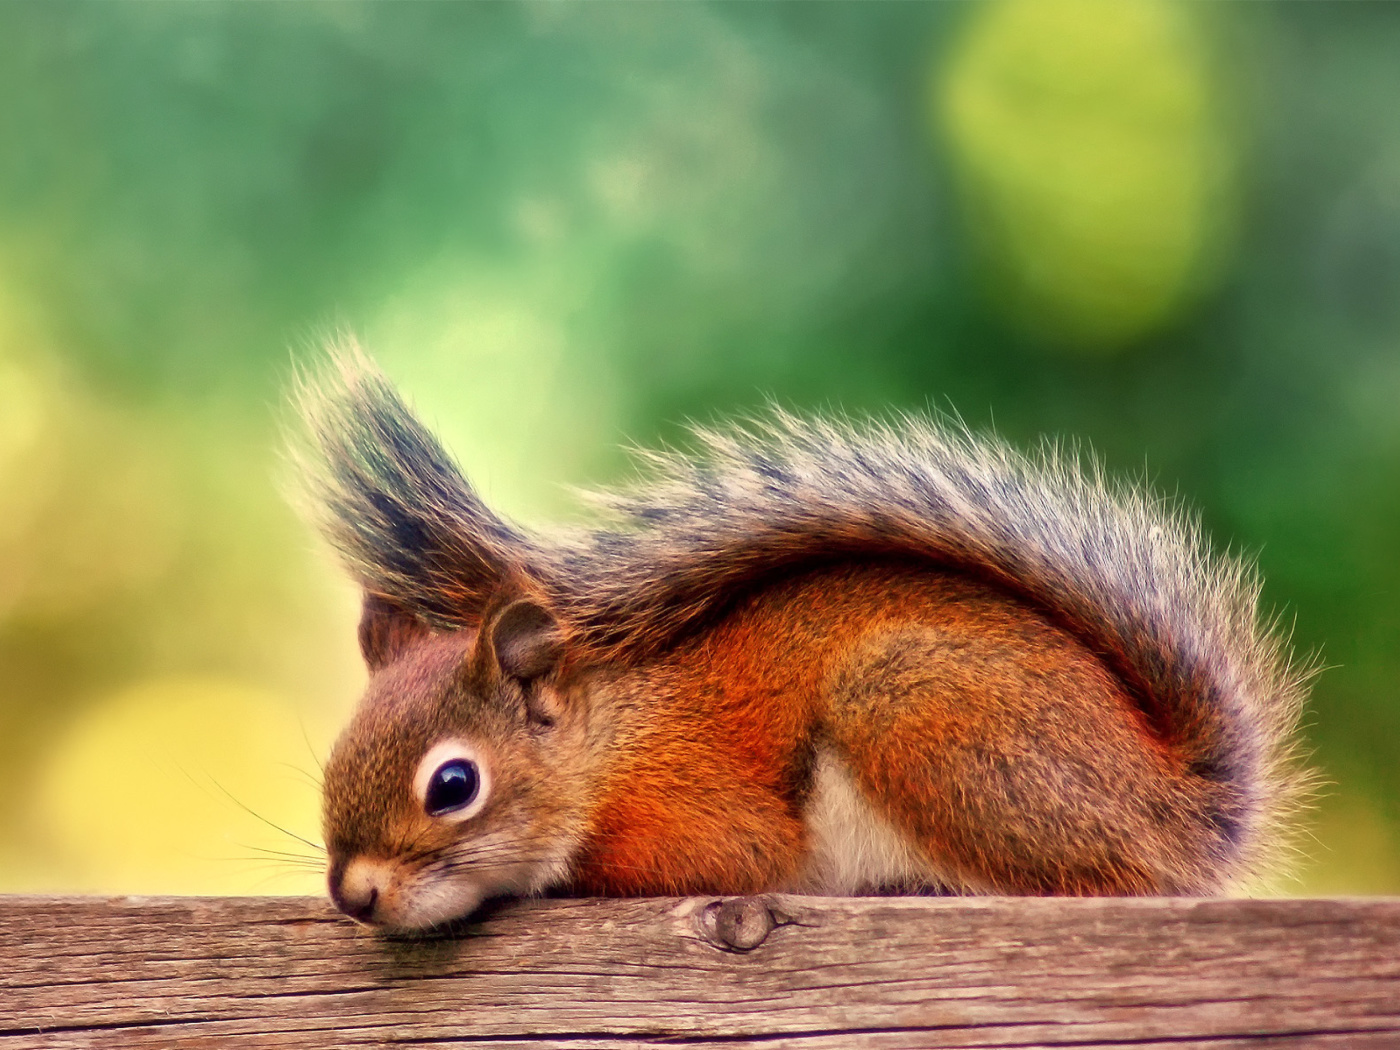 American red squirrel wallpaper 1400x1050